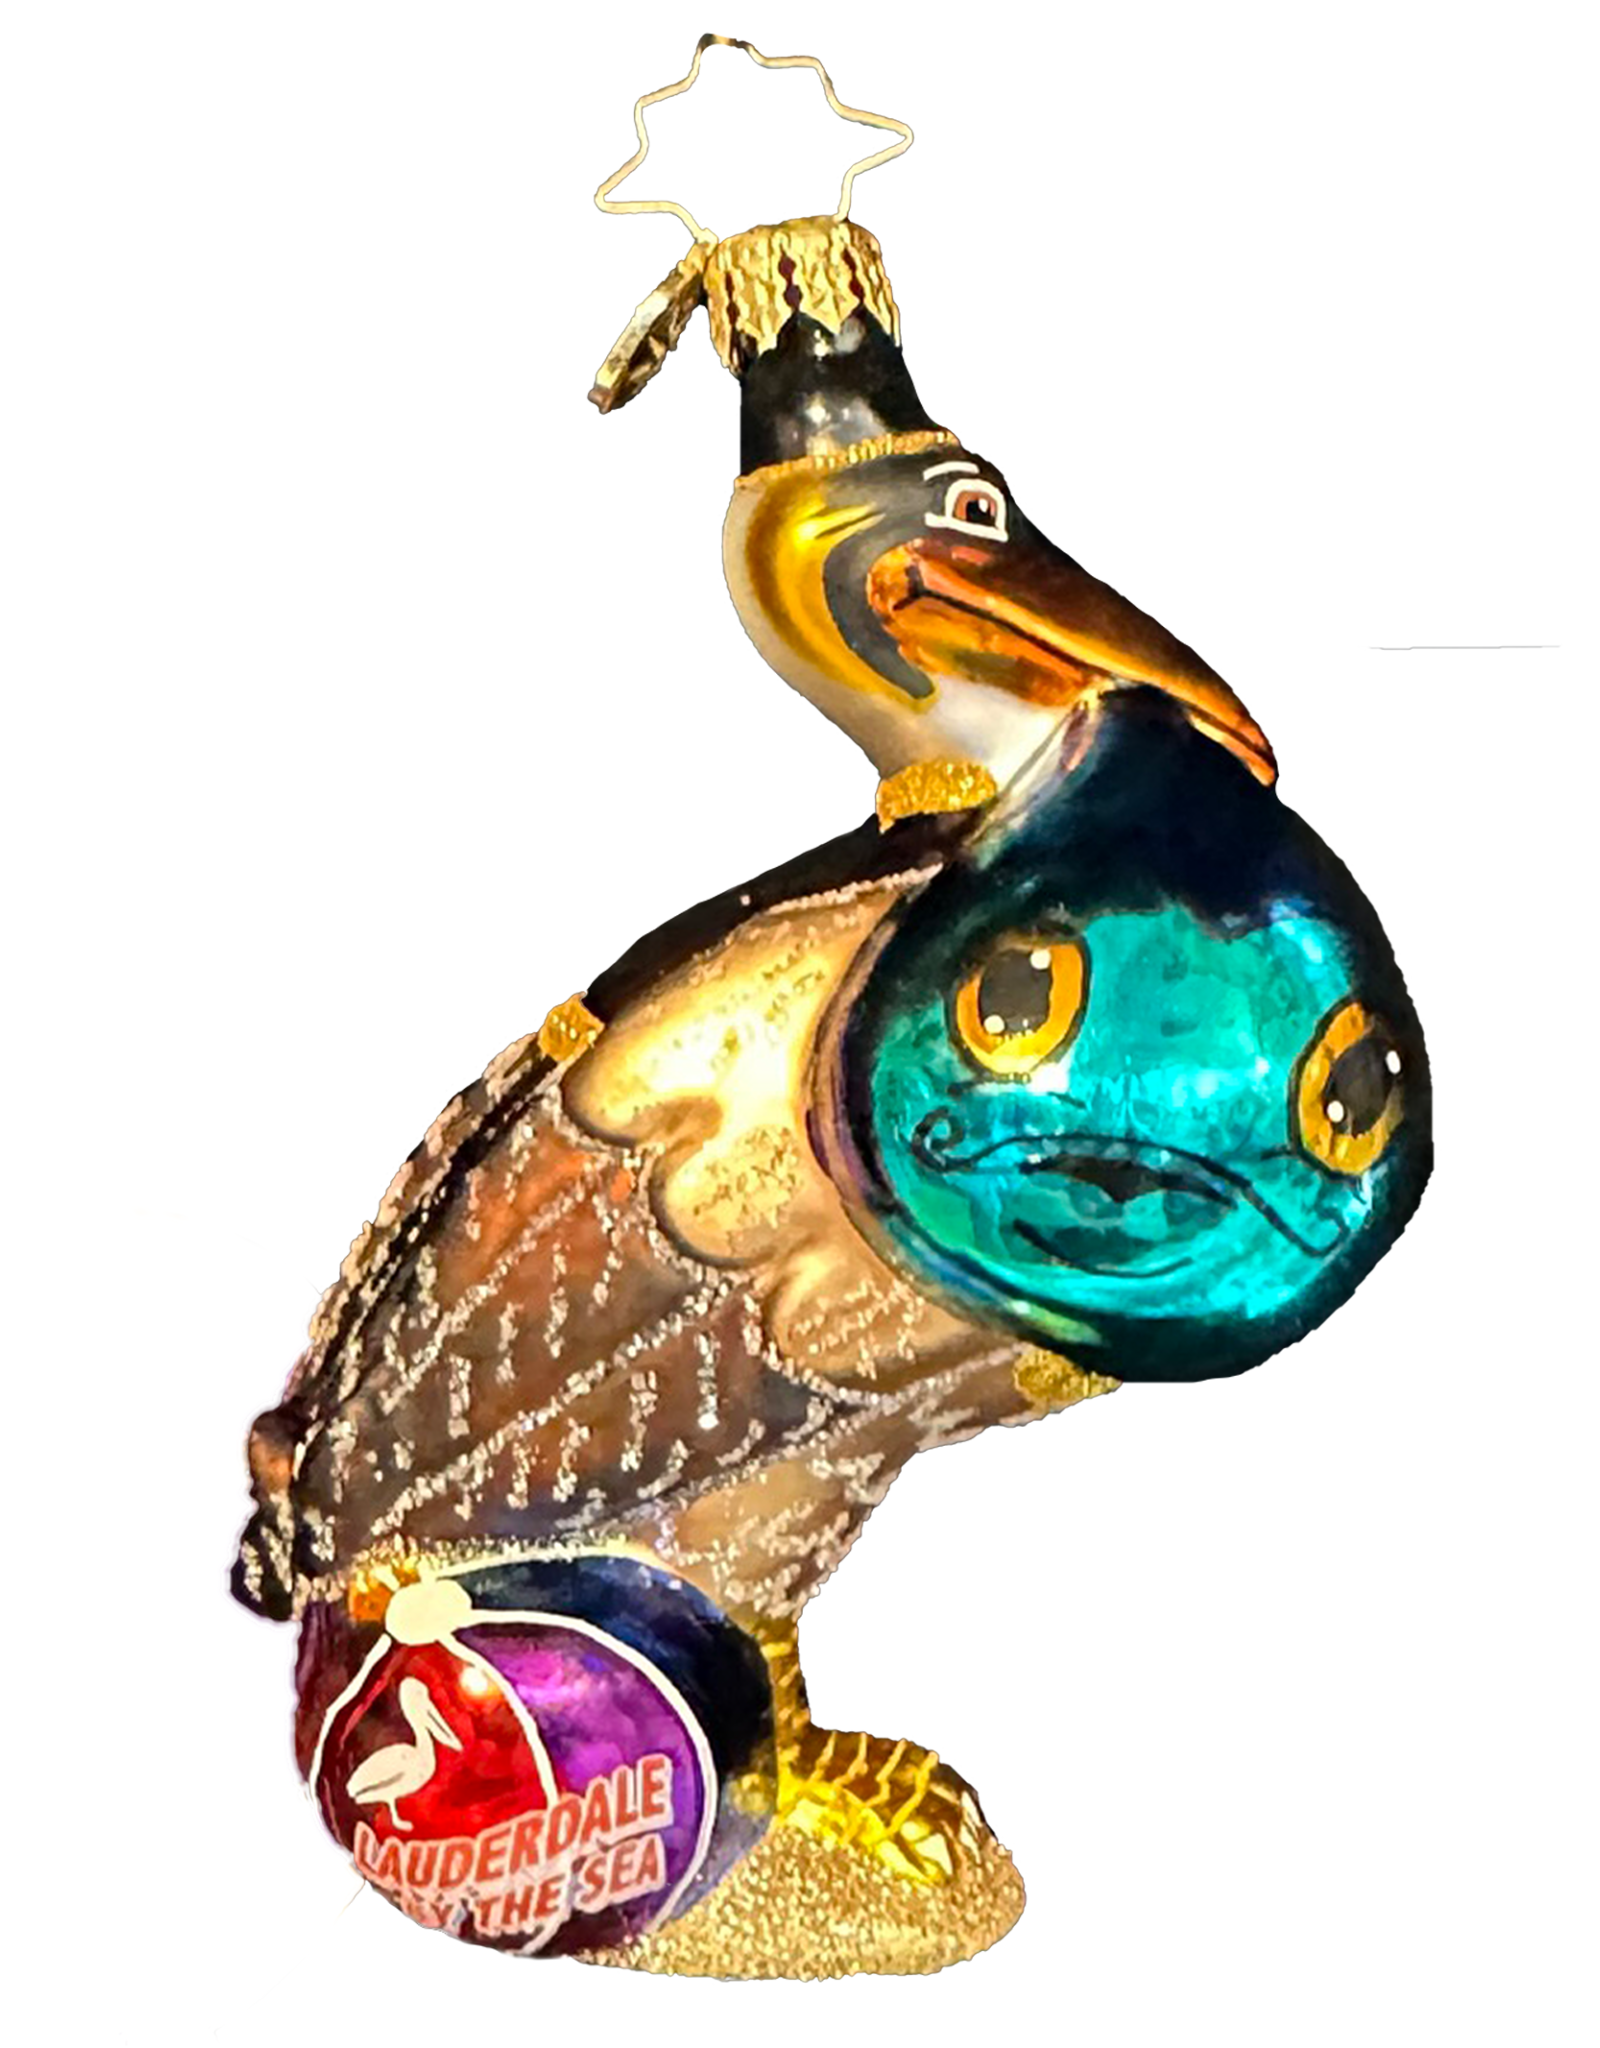 Christopher Radko "Laudy" By The Sea Lauderdale-By-The-Sea Ornament